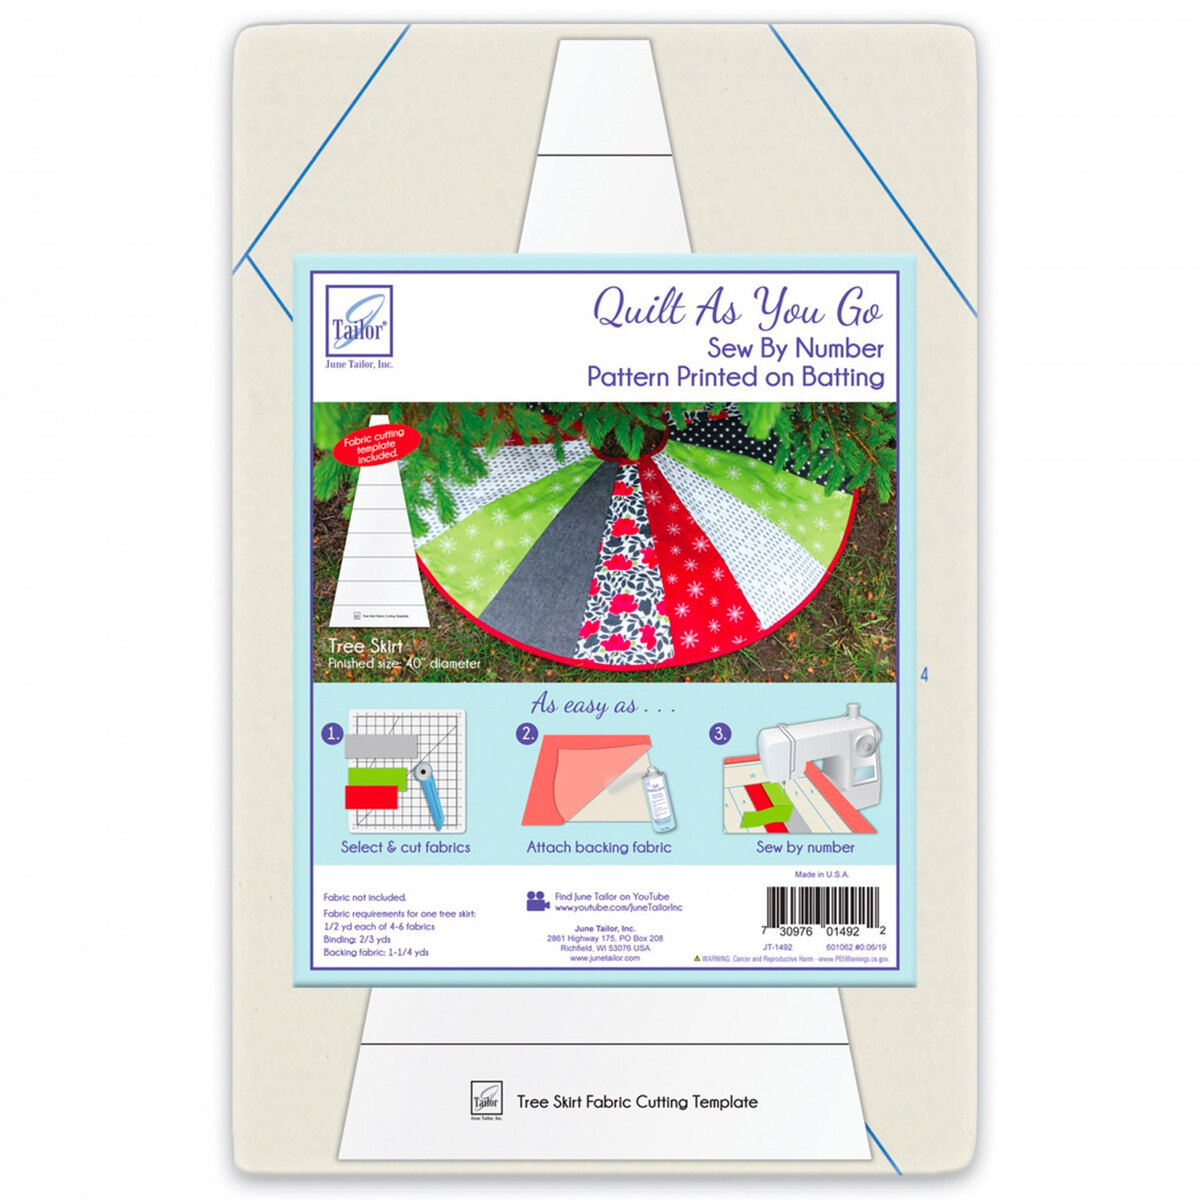 Get the June Tailor Quilt as you Go Apron Kit here at the Bungalow